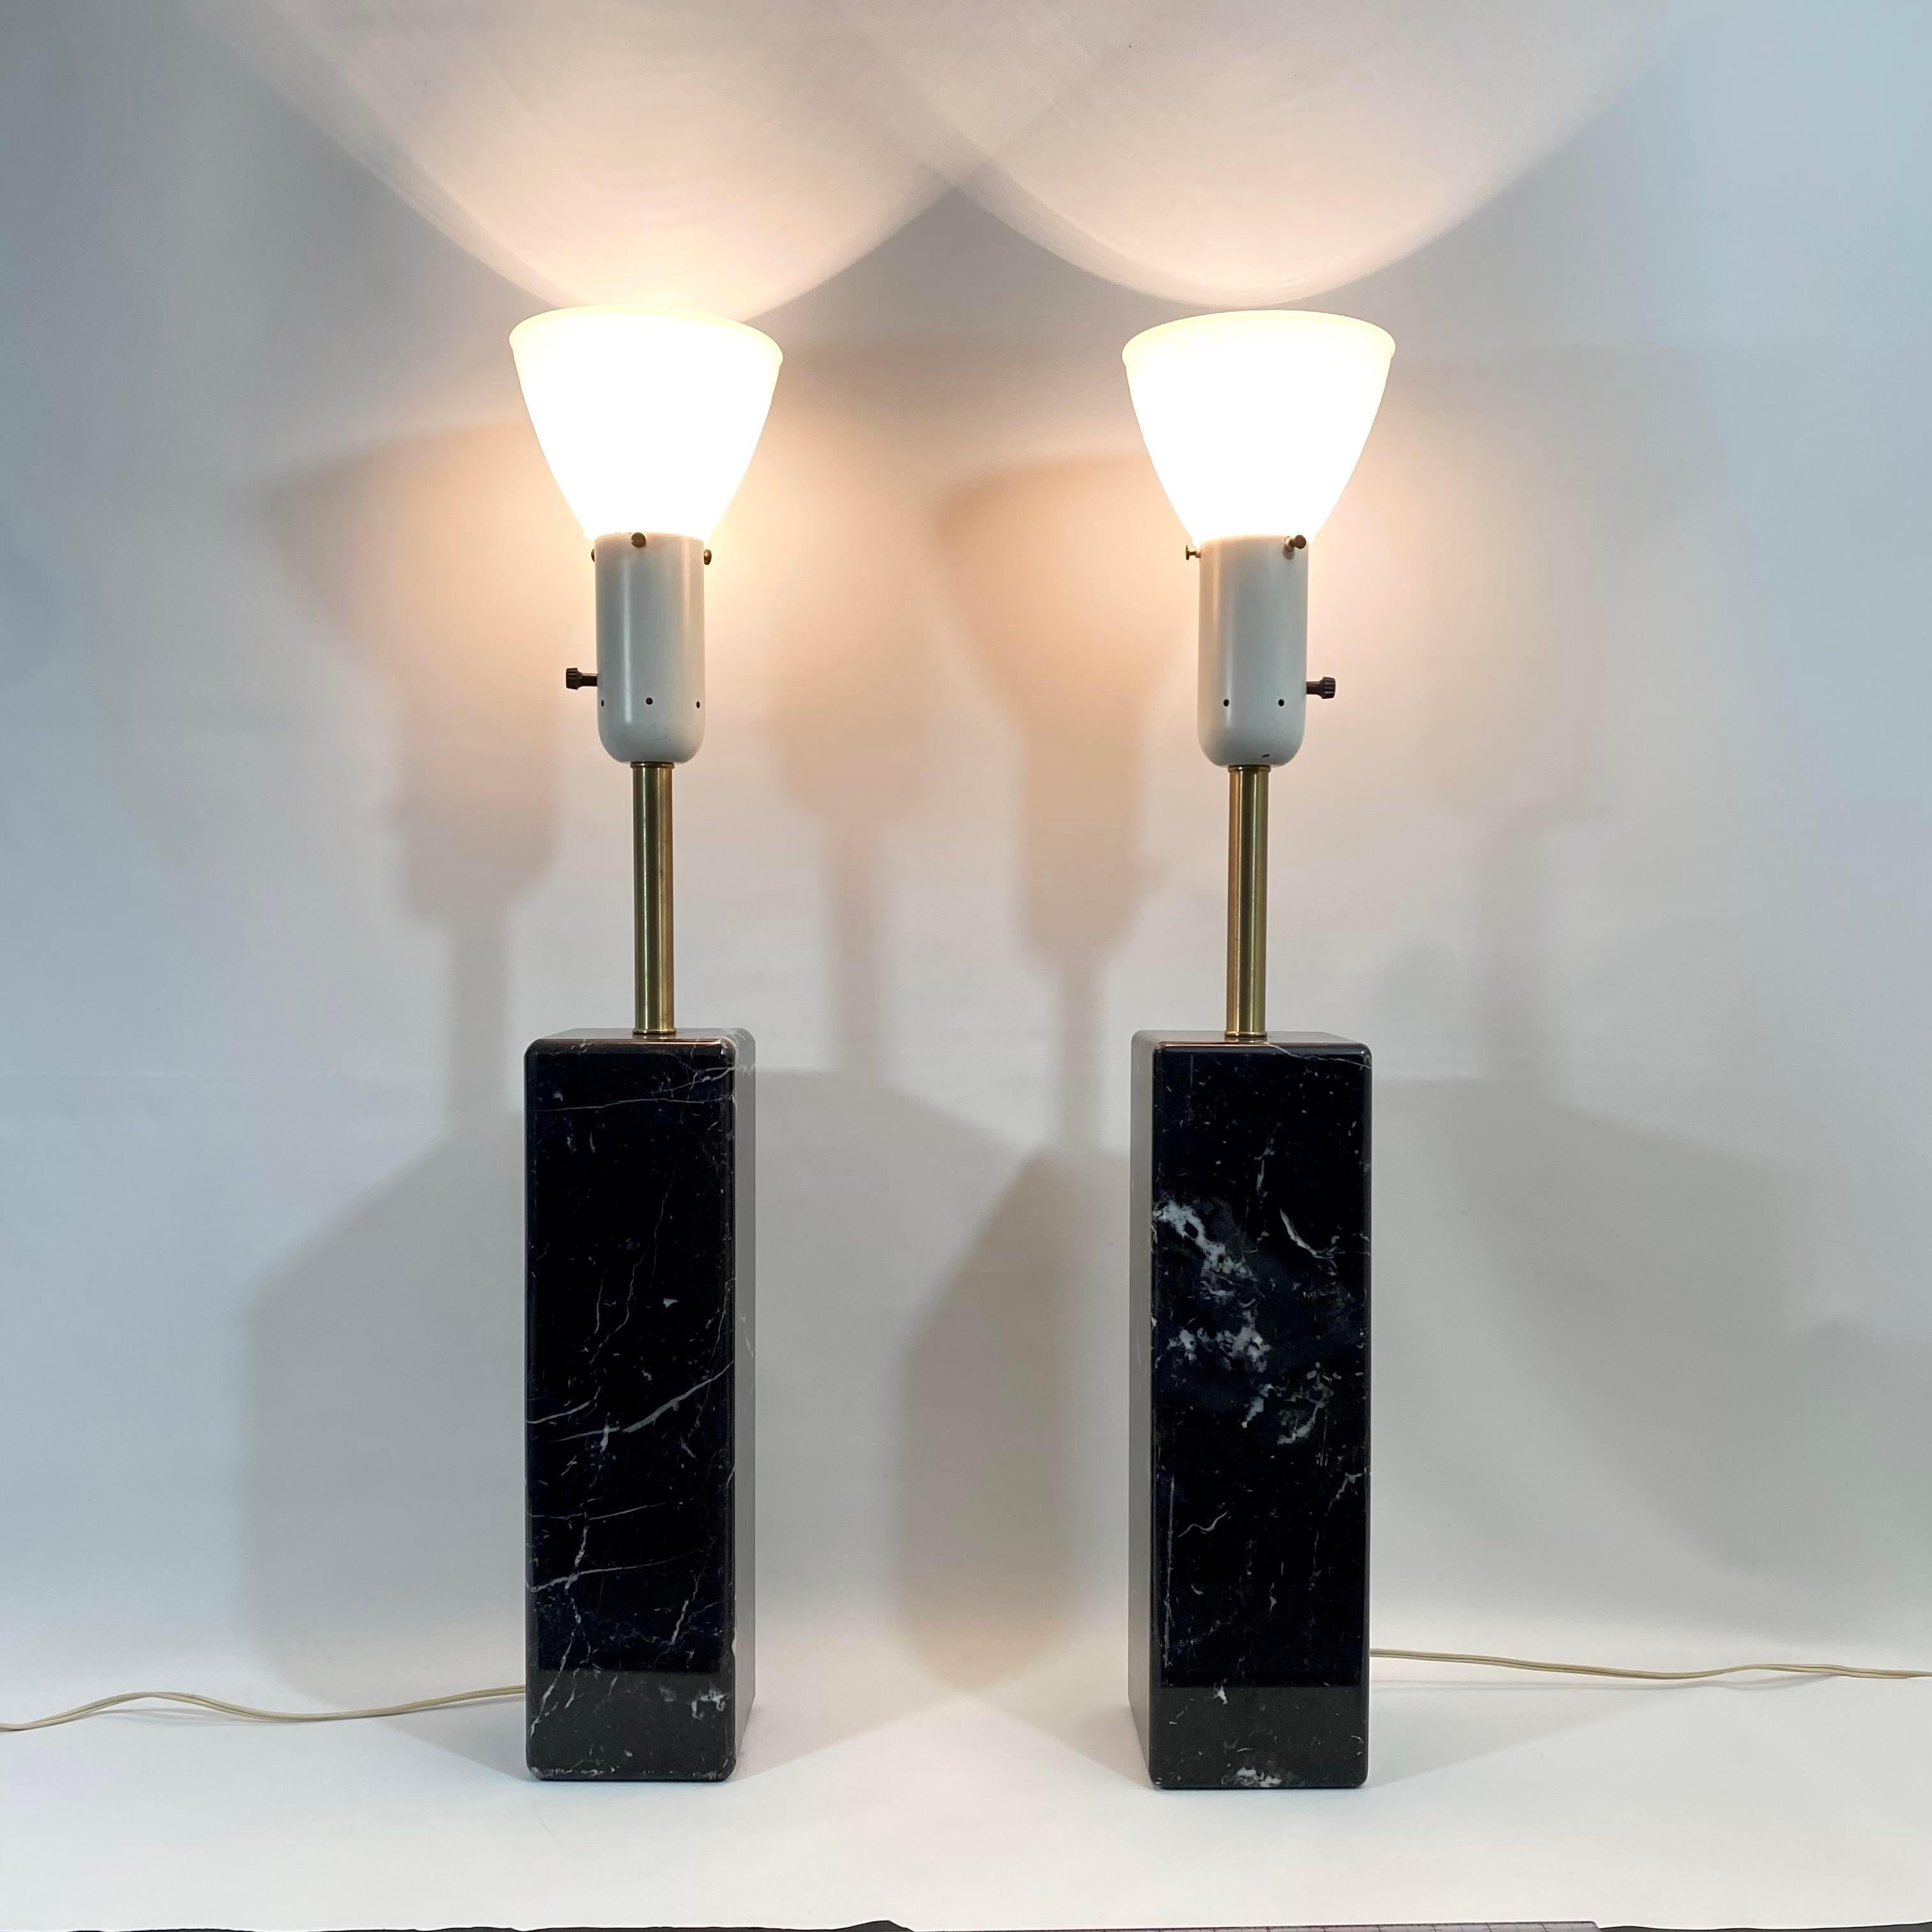 Vintage circa 1960s Water Von Nessen lamp pair. Lamps have glass diffusers to hold shades. Black marble with white veining throughout and brass neck. Lamps each weight approximately 33+ lbs. One lamp is marked with makers mark sticker.
Marble base